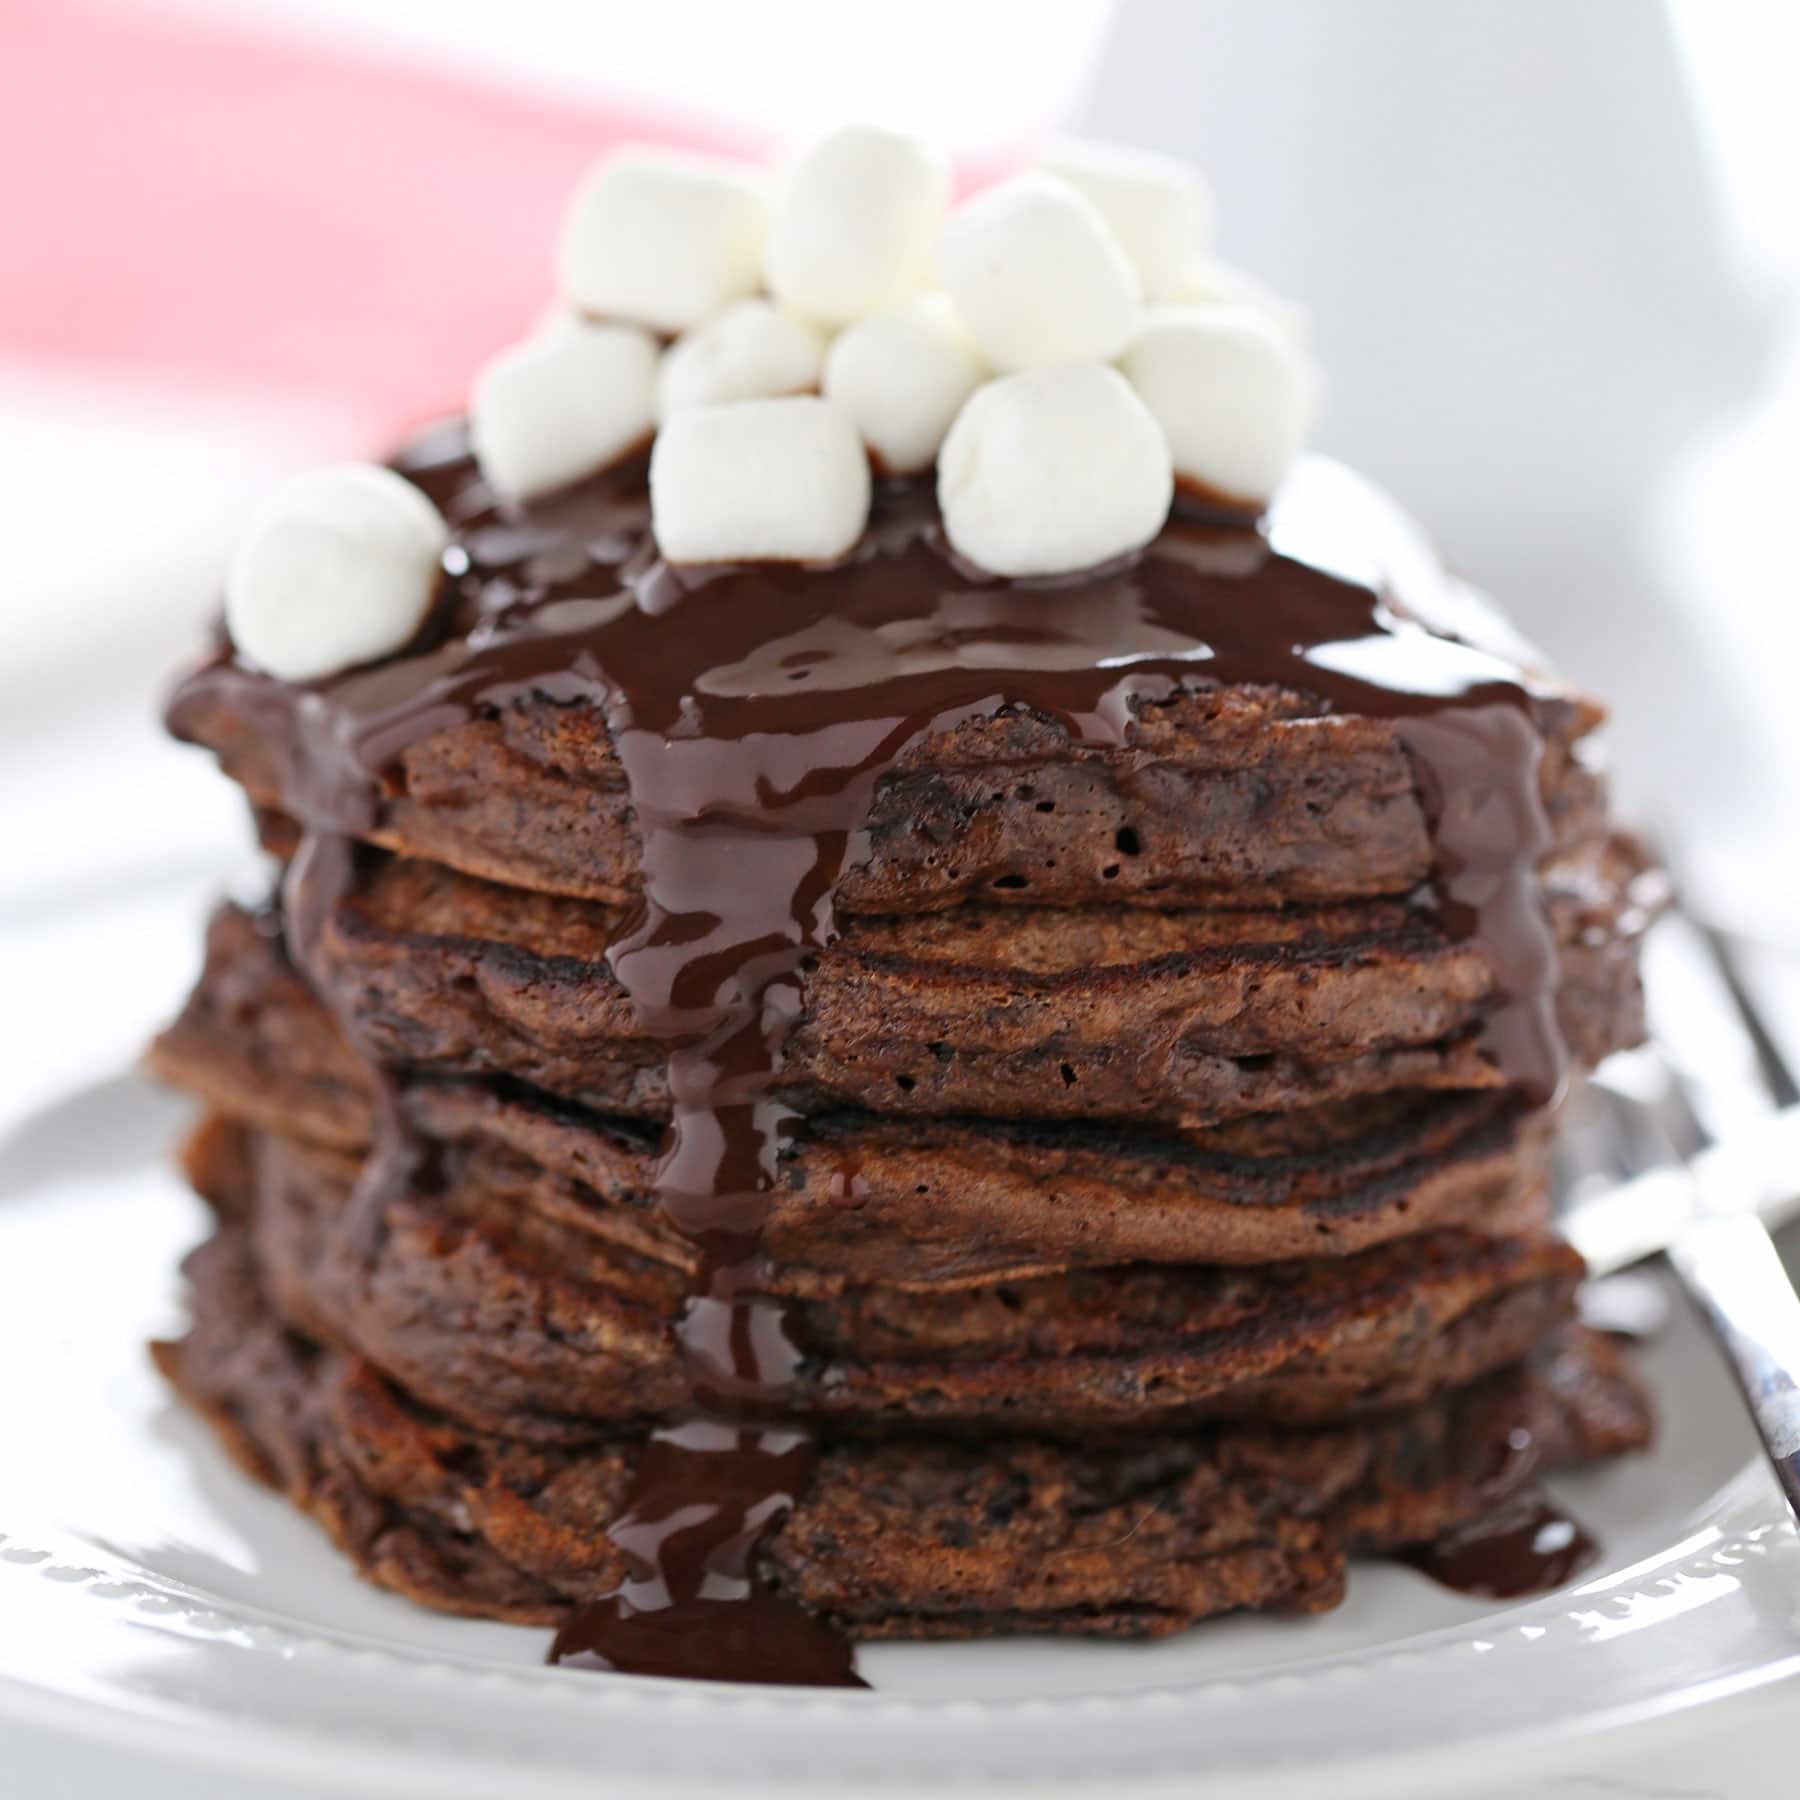 Hot Chocolate Pancakes feature rich chocolate buttermilk pancakes with a thick chocolate fudge topping and garnish with mini marshmallows.